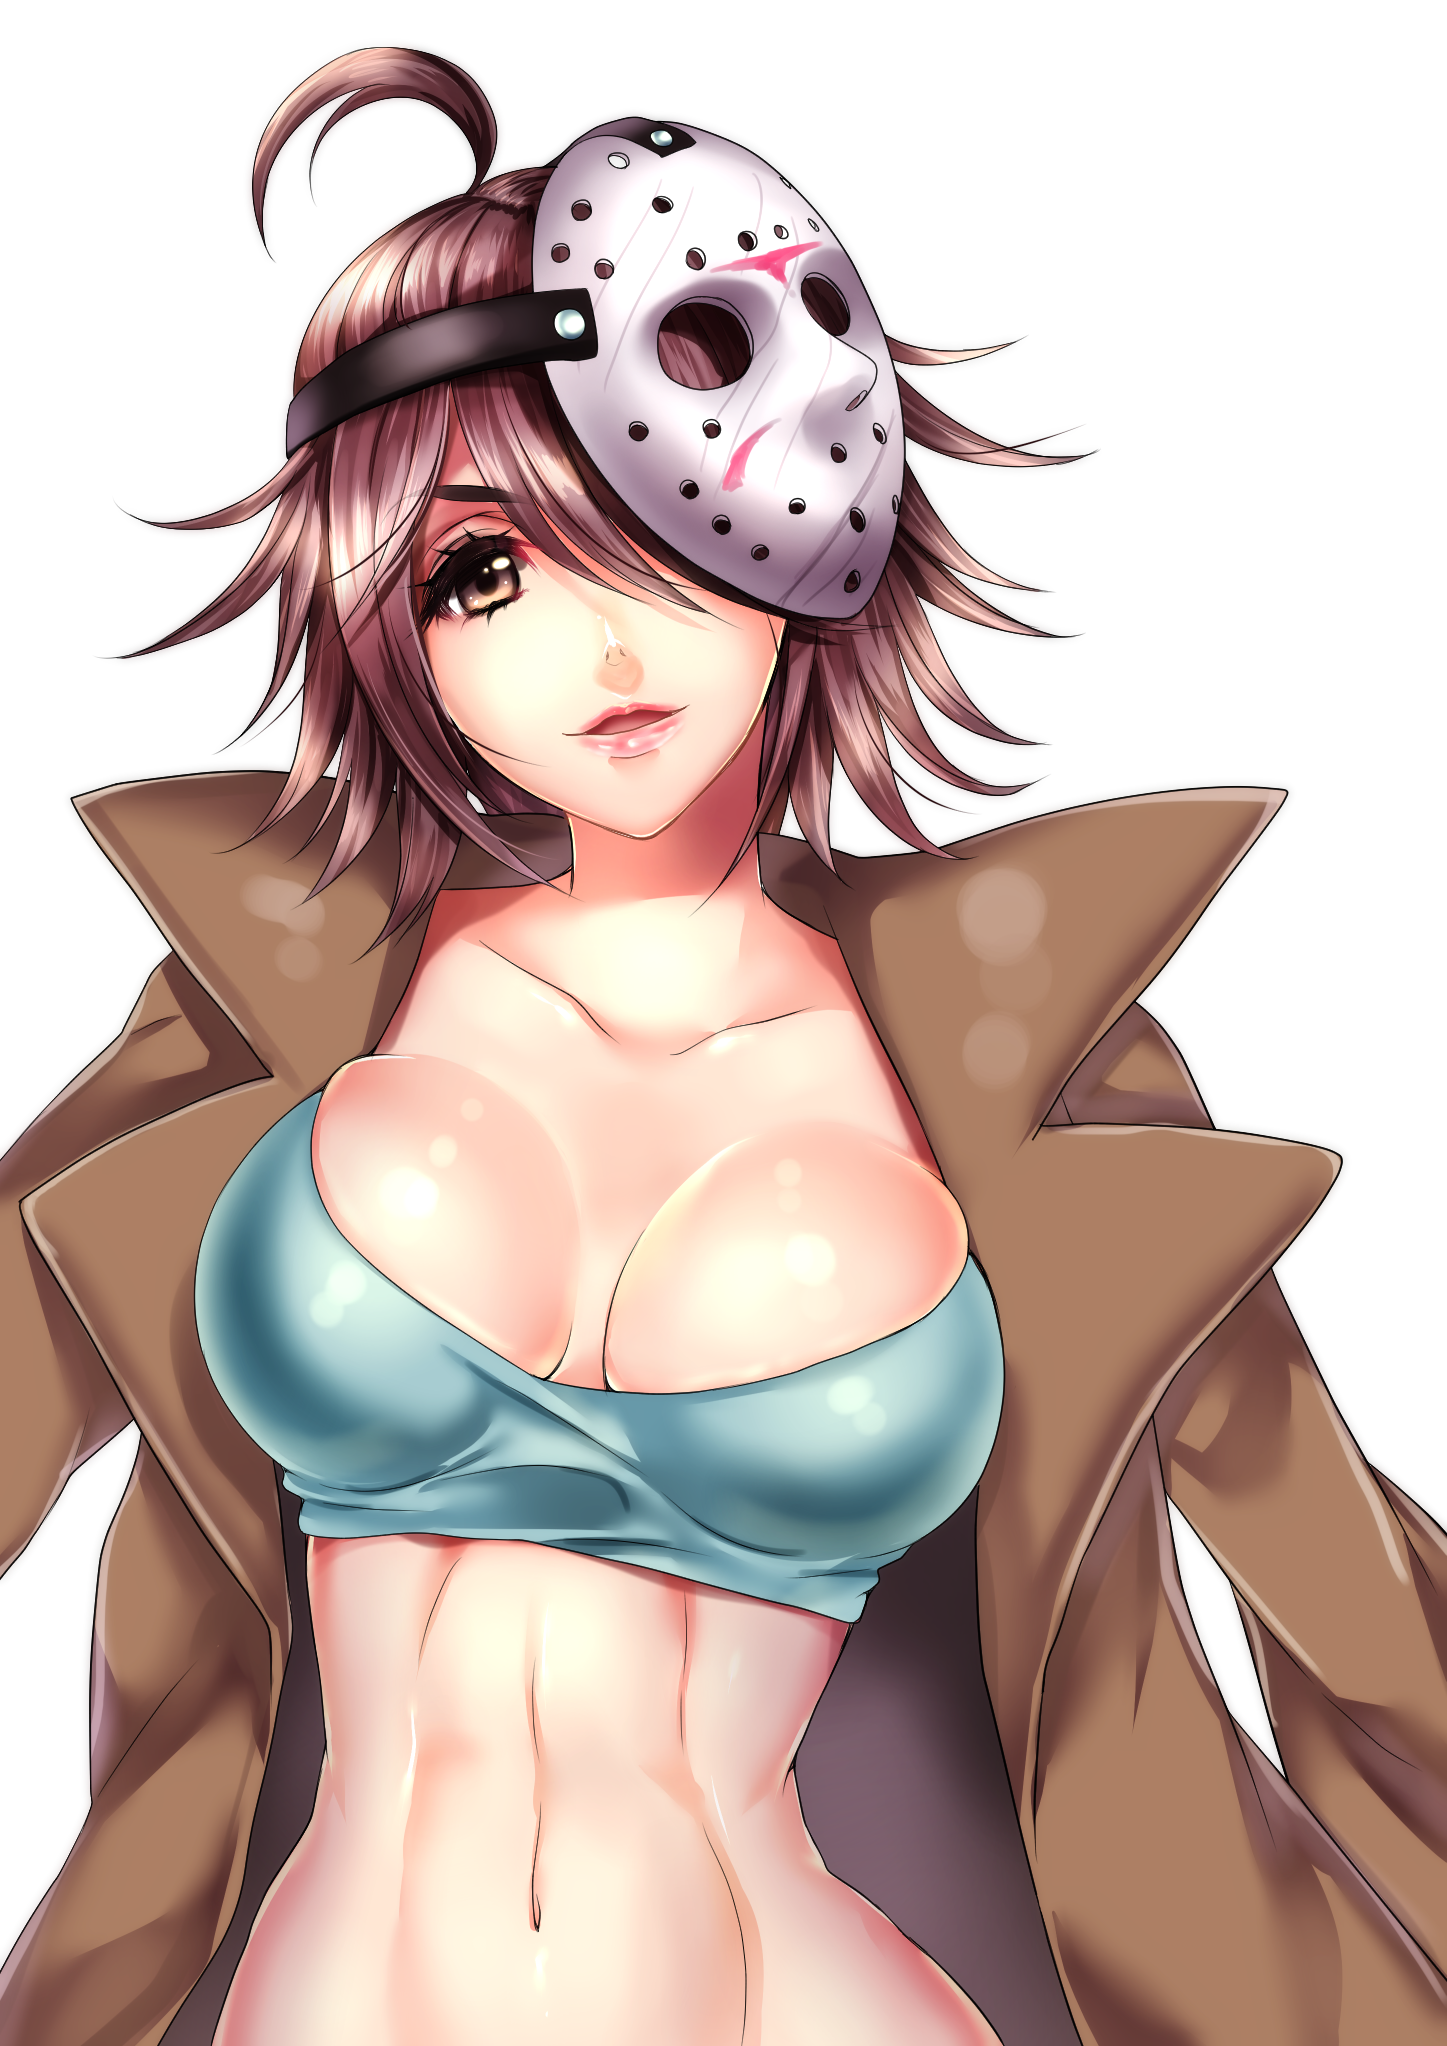 Anime 1447x2046 Friday the 13th hockey mask cleavage Jason Voorhees